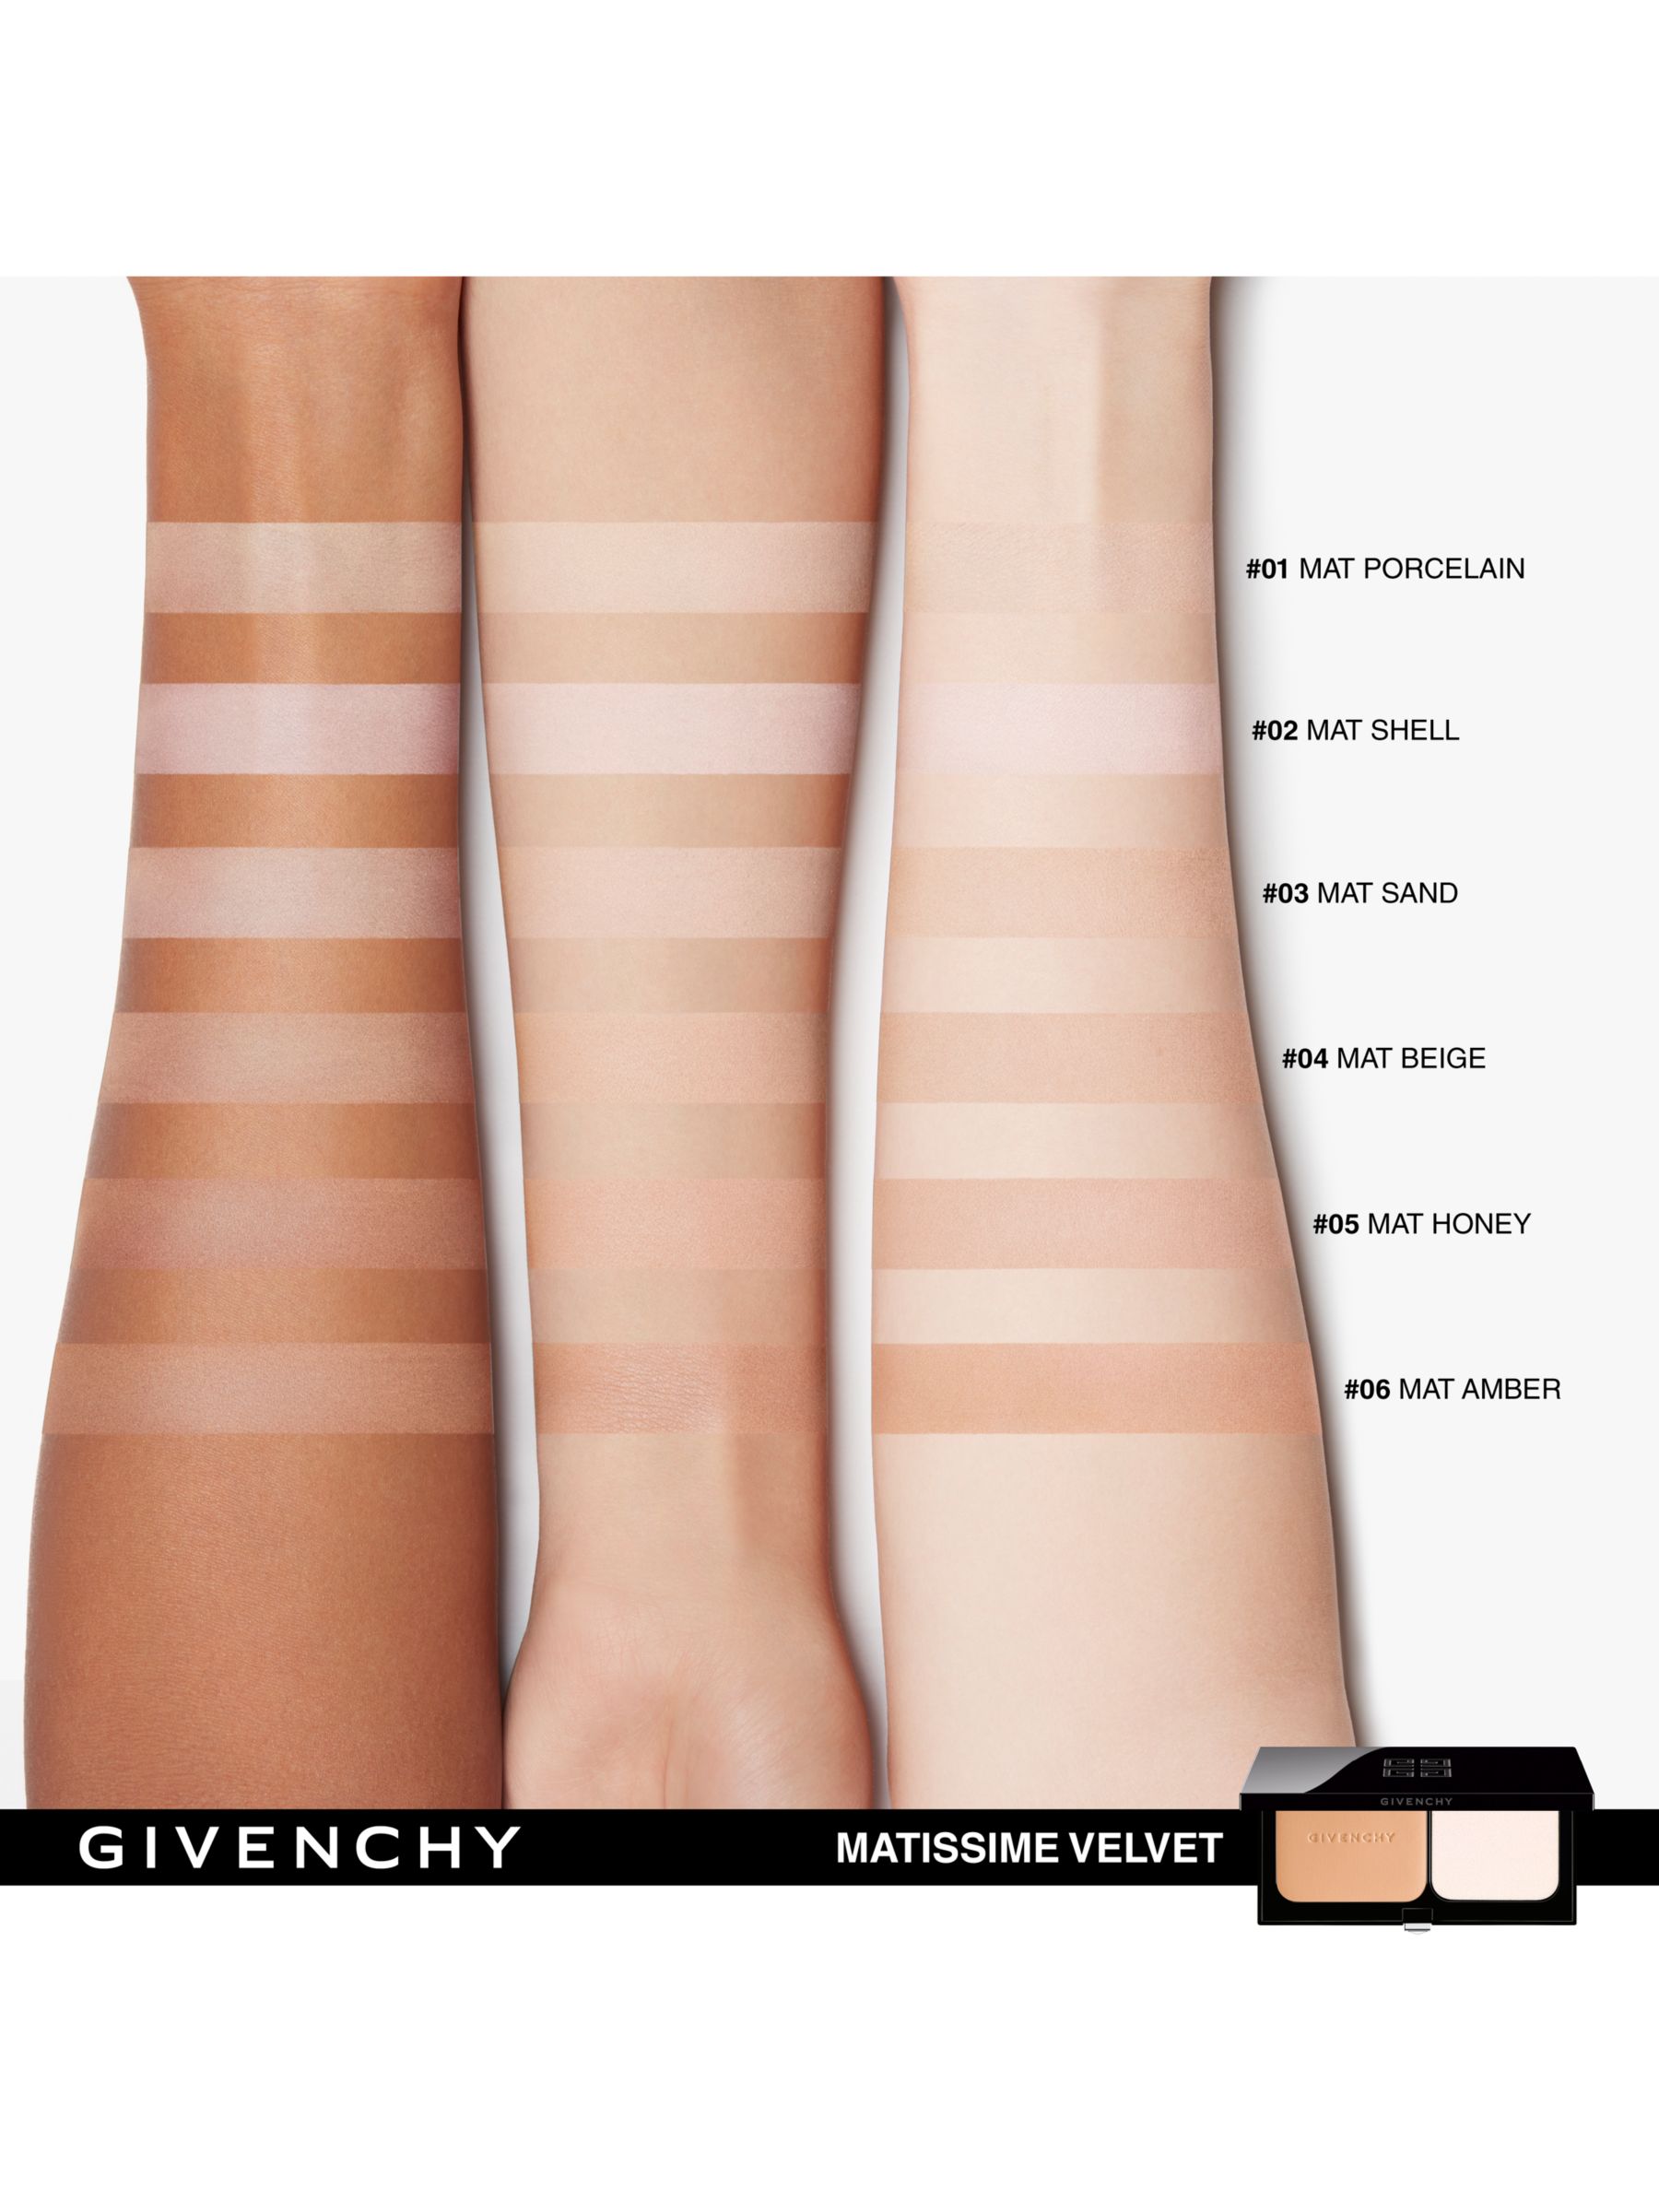 Givenchy Matissime Velvet Compact Foundation